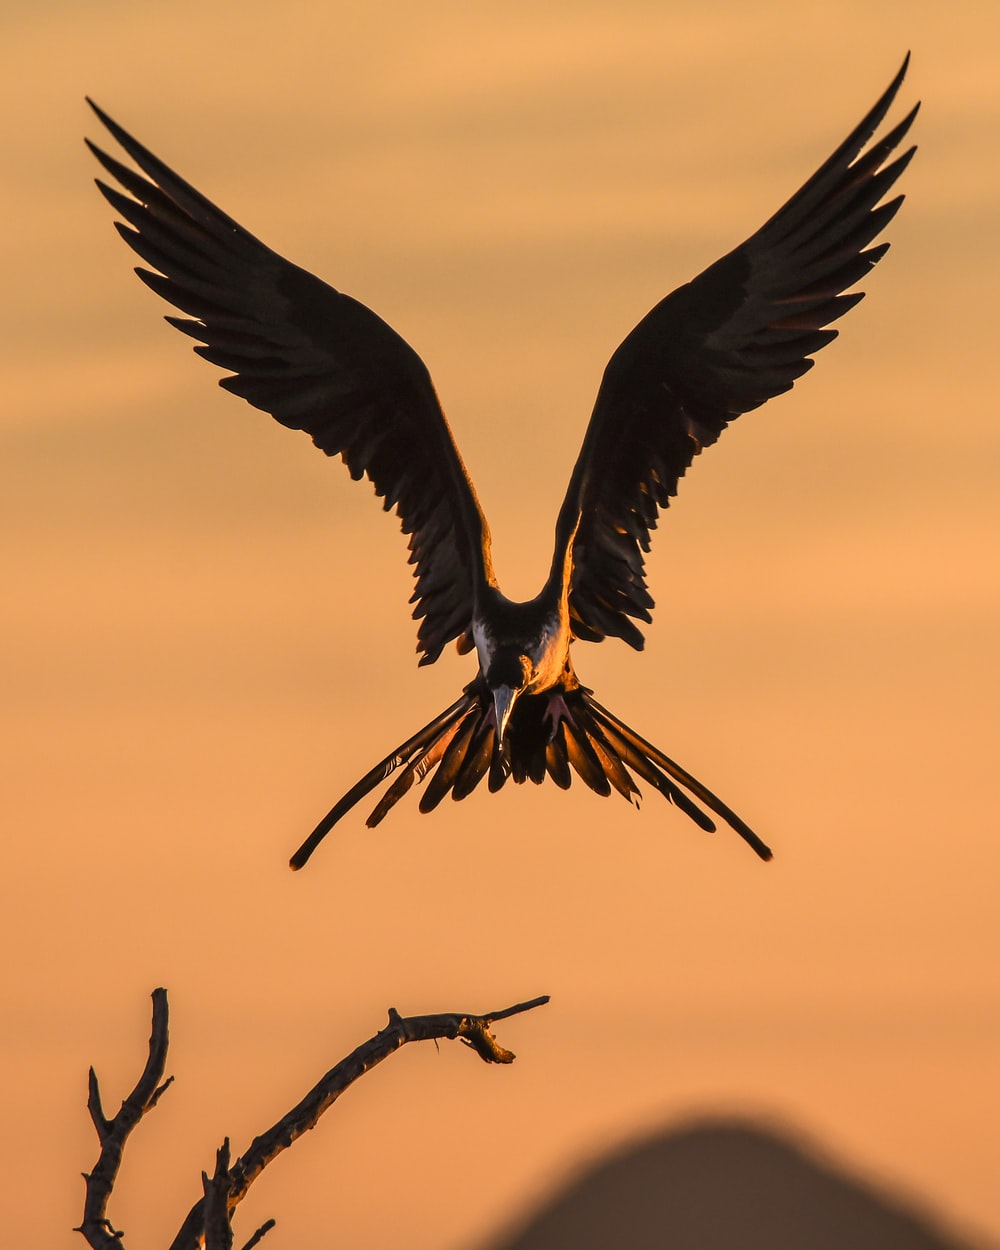 Bird Wings Picture. Download Free Image